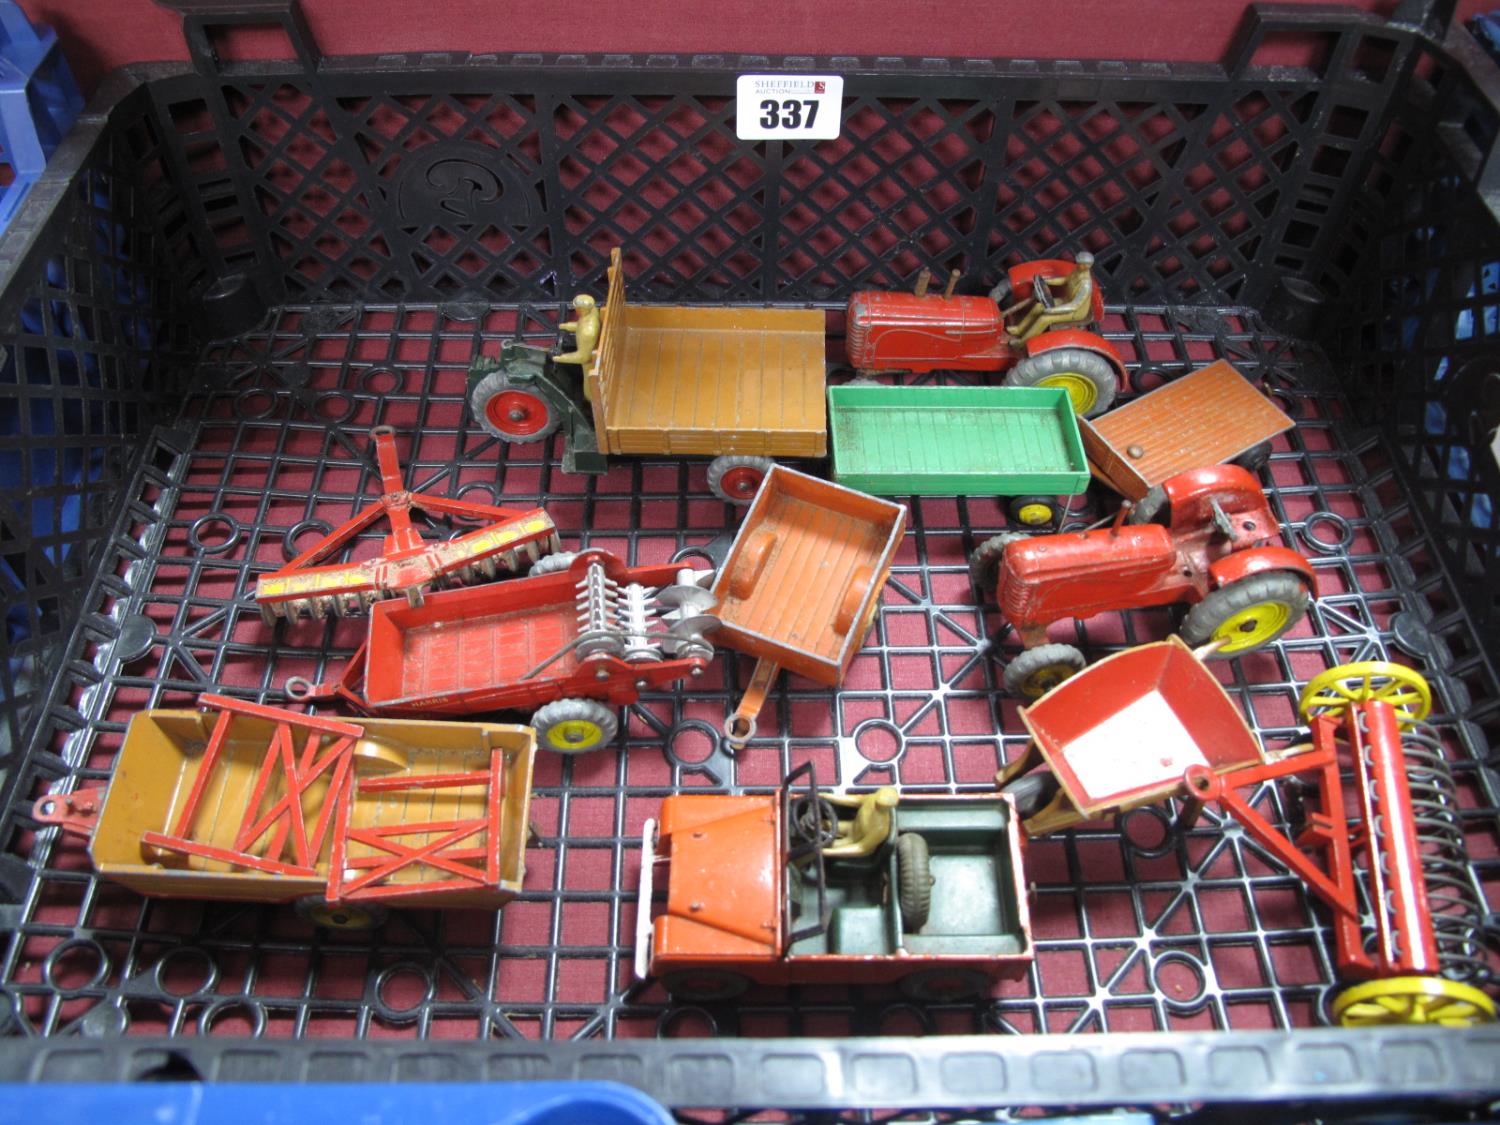 A Quantity of Original Dinky Diecast Vehicles, all farming or similar subjects, including Land